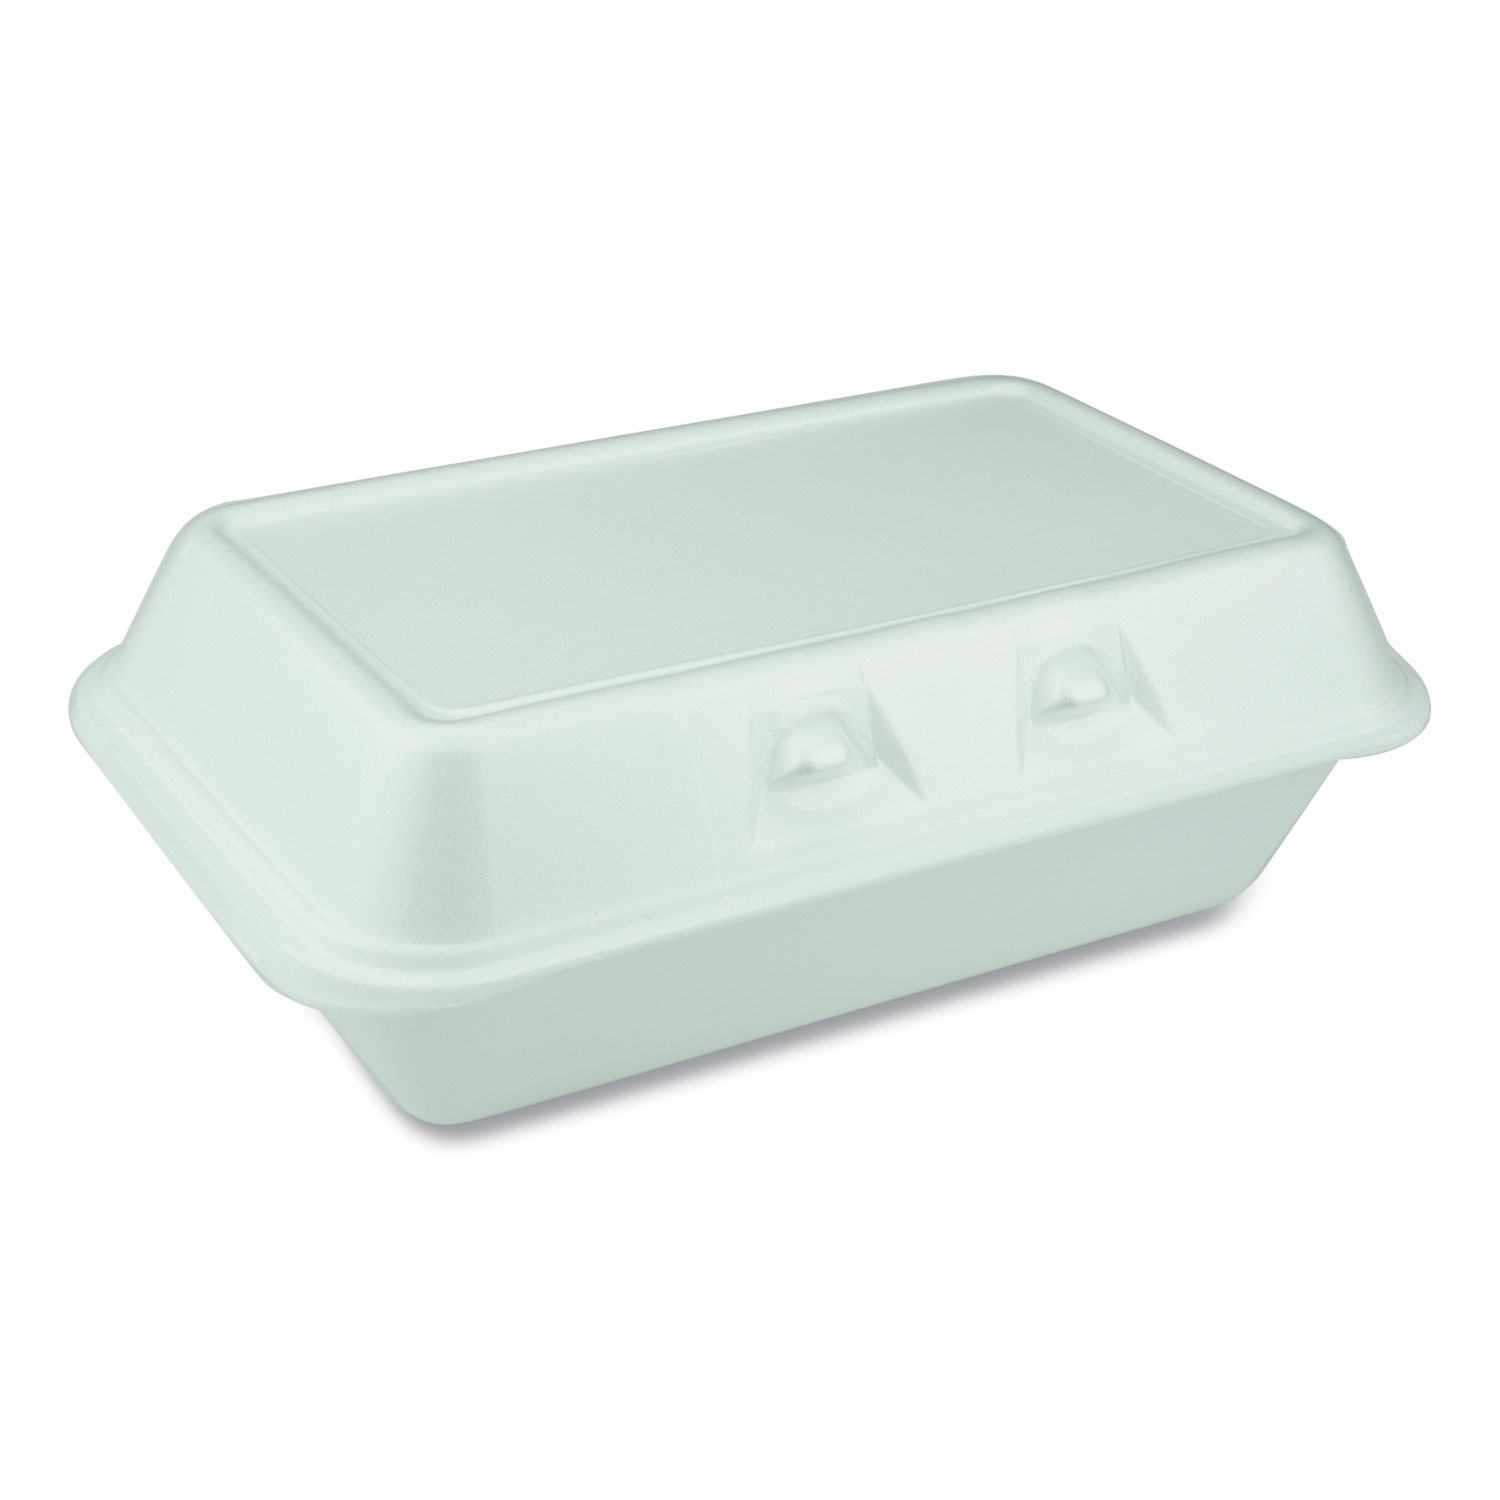 Pactiv SmartLock Foam Hinged Containers, Medium, 8.75 x 5.5 x 3, 1-Compartment, White, 220/Carton